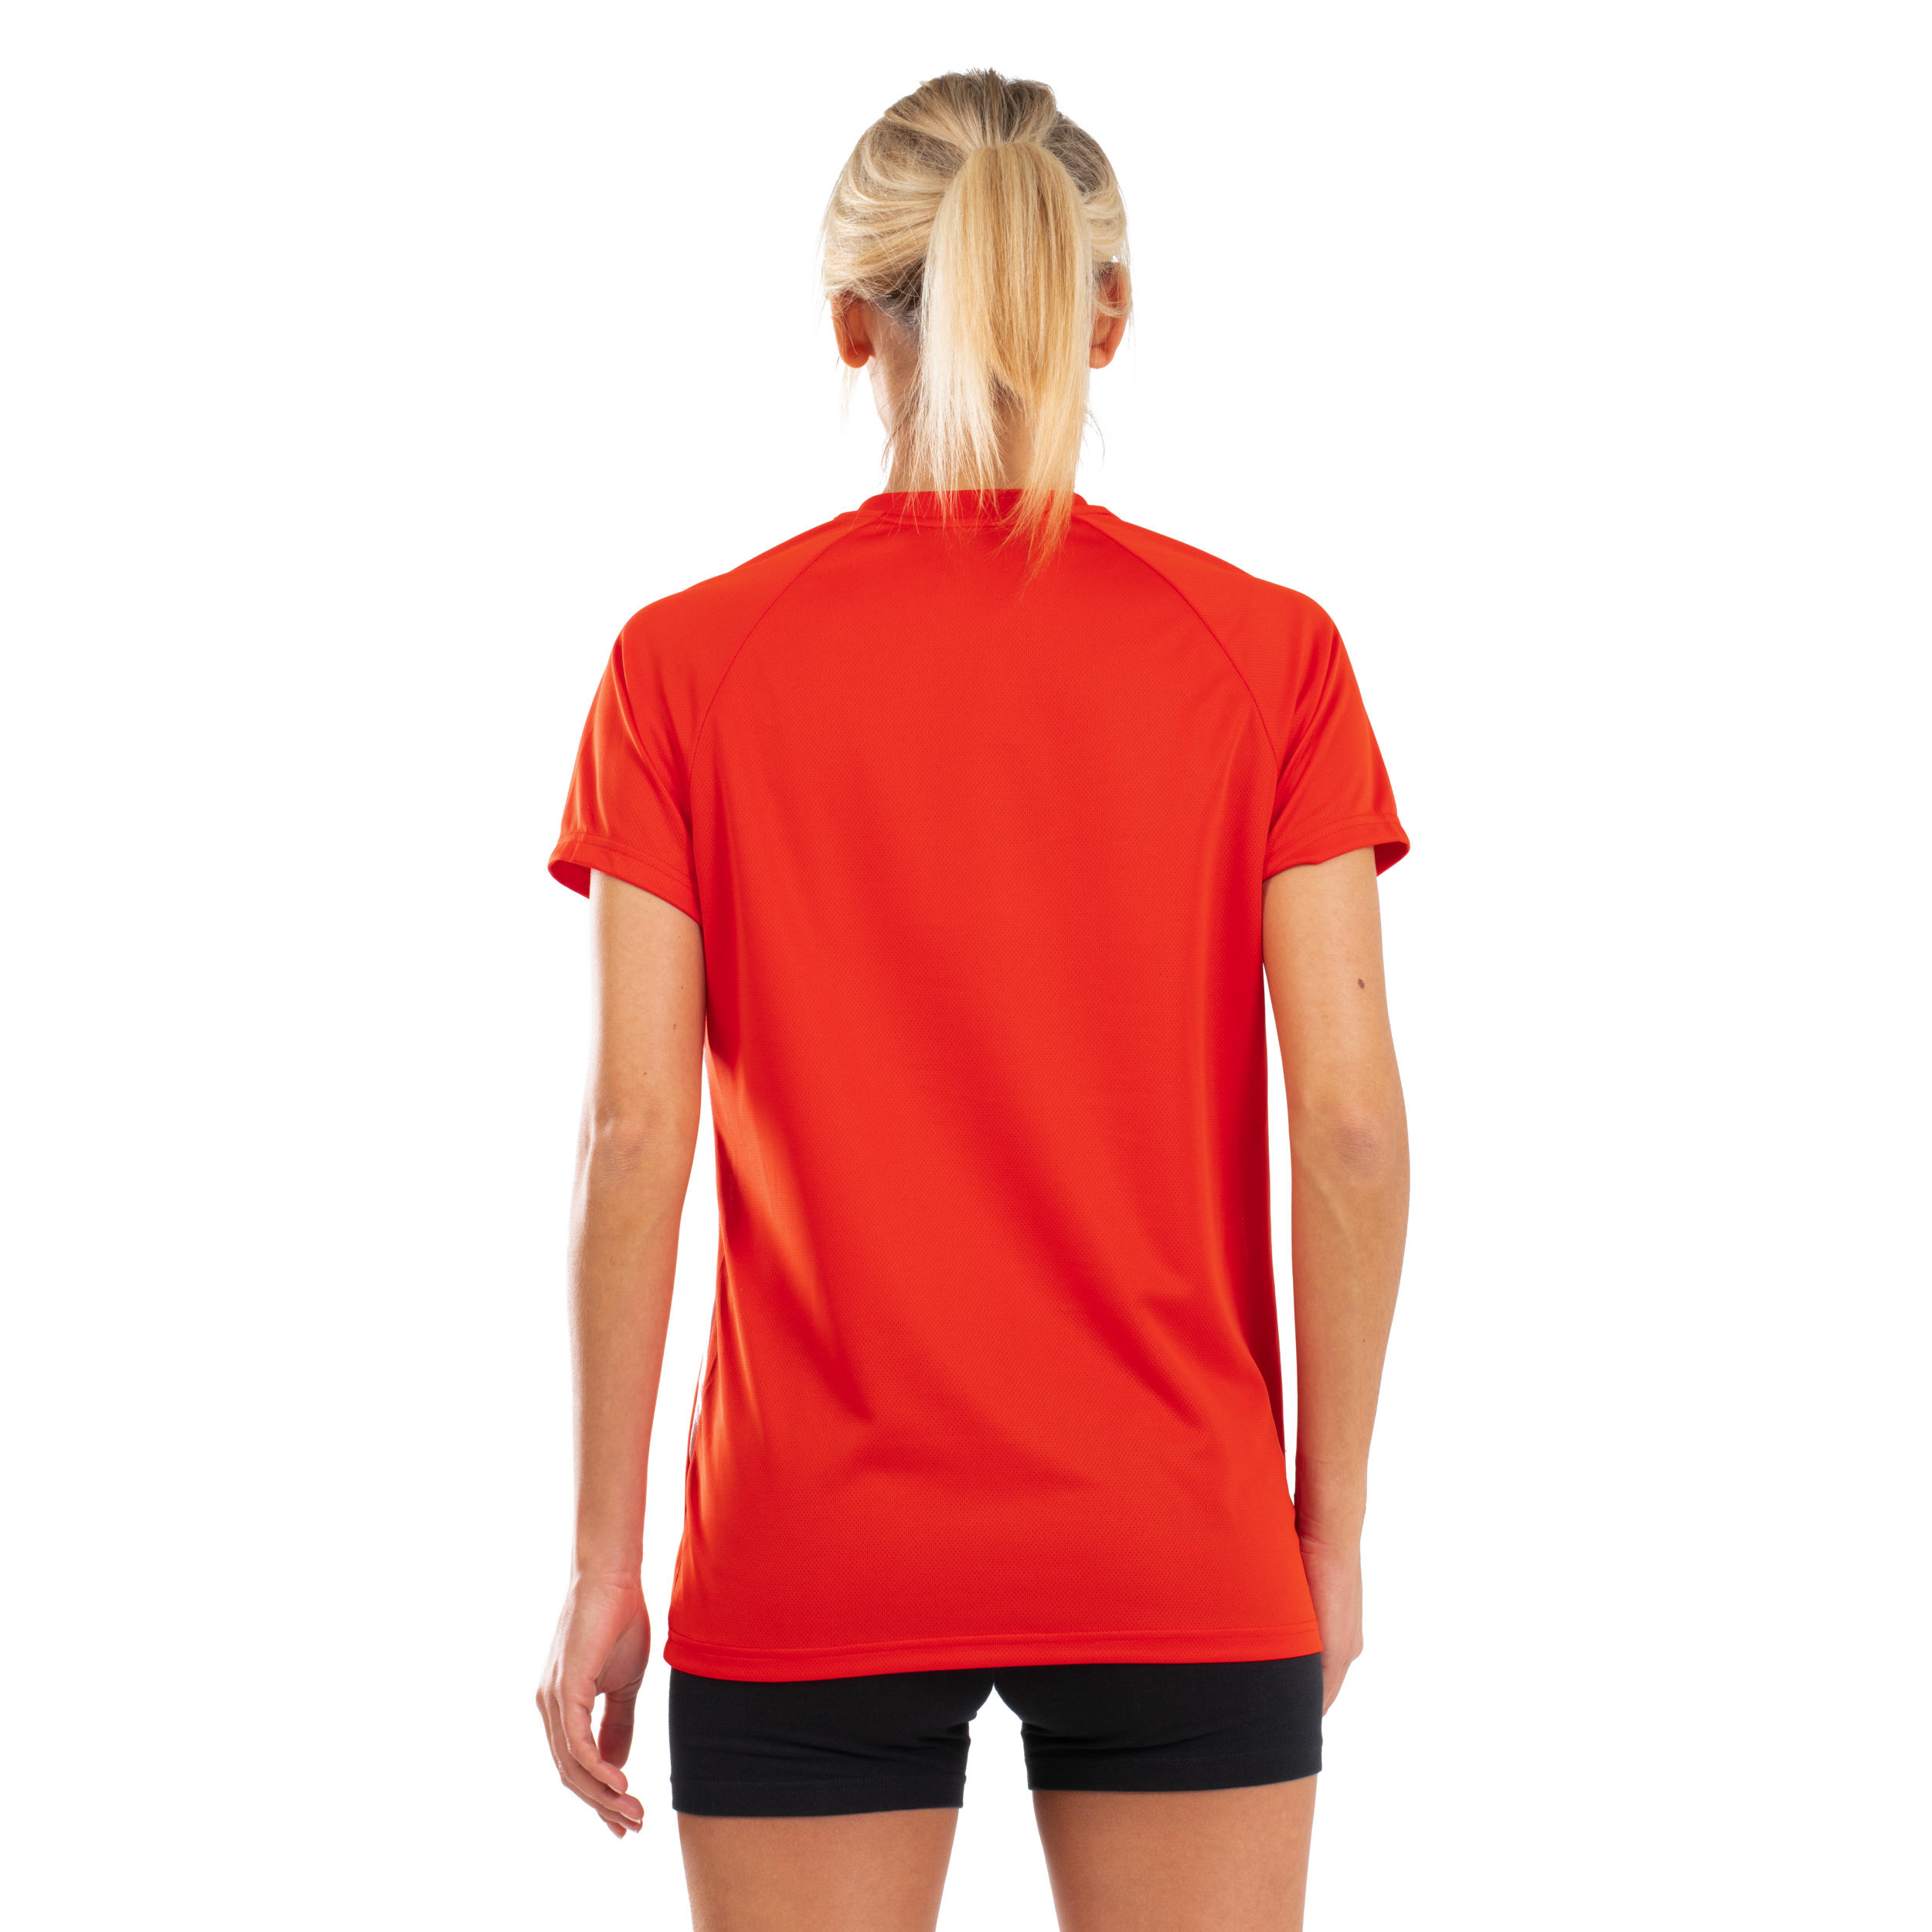 V100 Women's Volleyball Jersey - Red 4/8